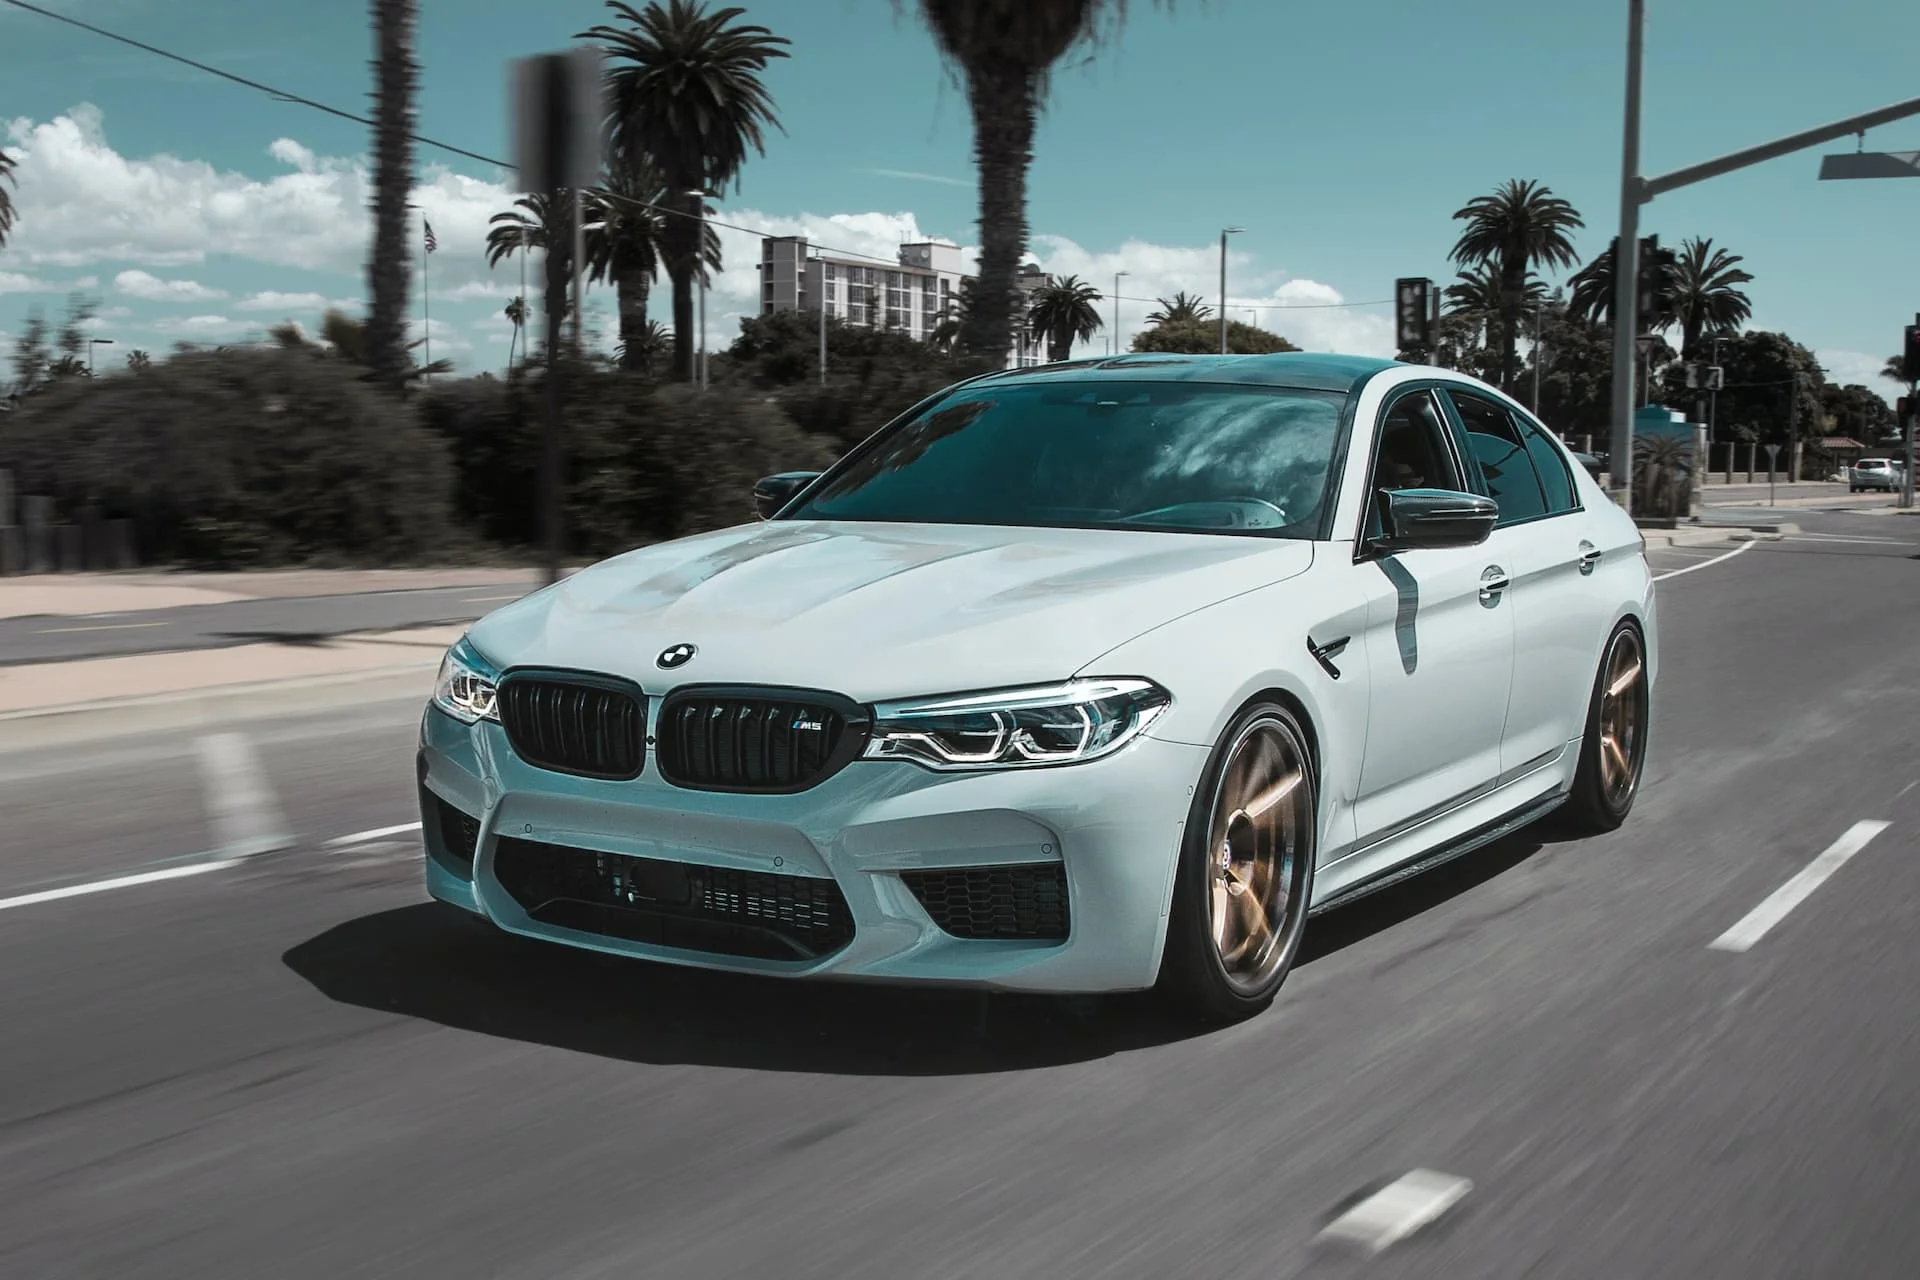 BMW M5 Driving with Palm Beaches In The Background